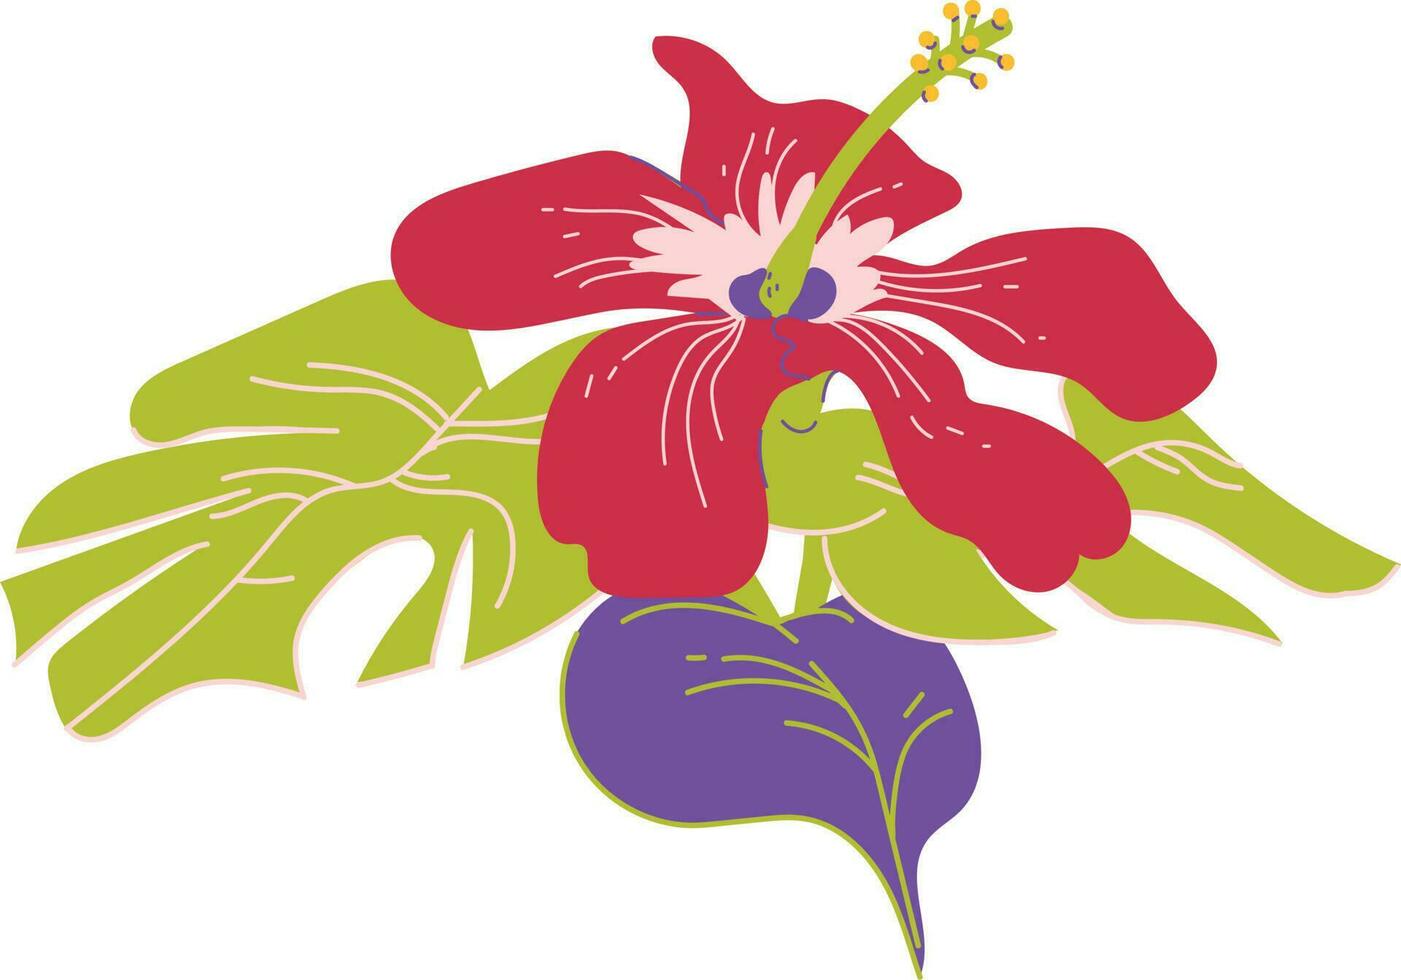 purple orchid flower. Hibiscus flower. Vector illustration isolated on white background.